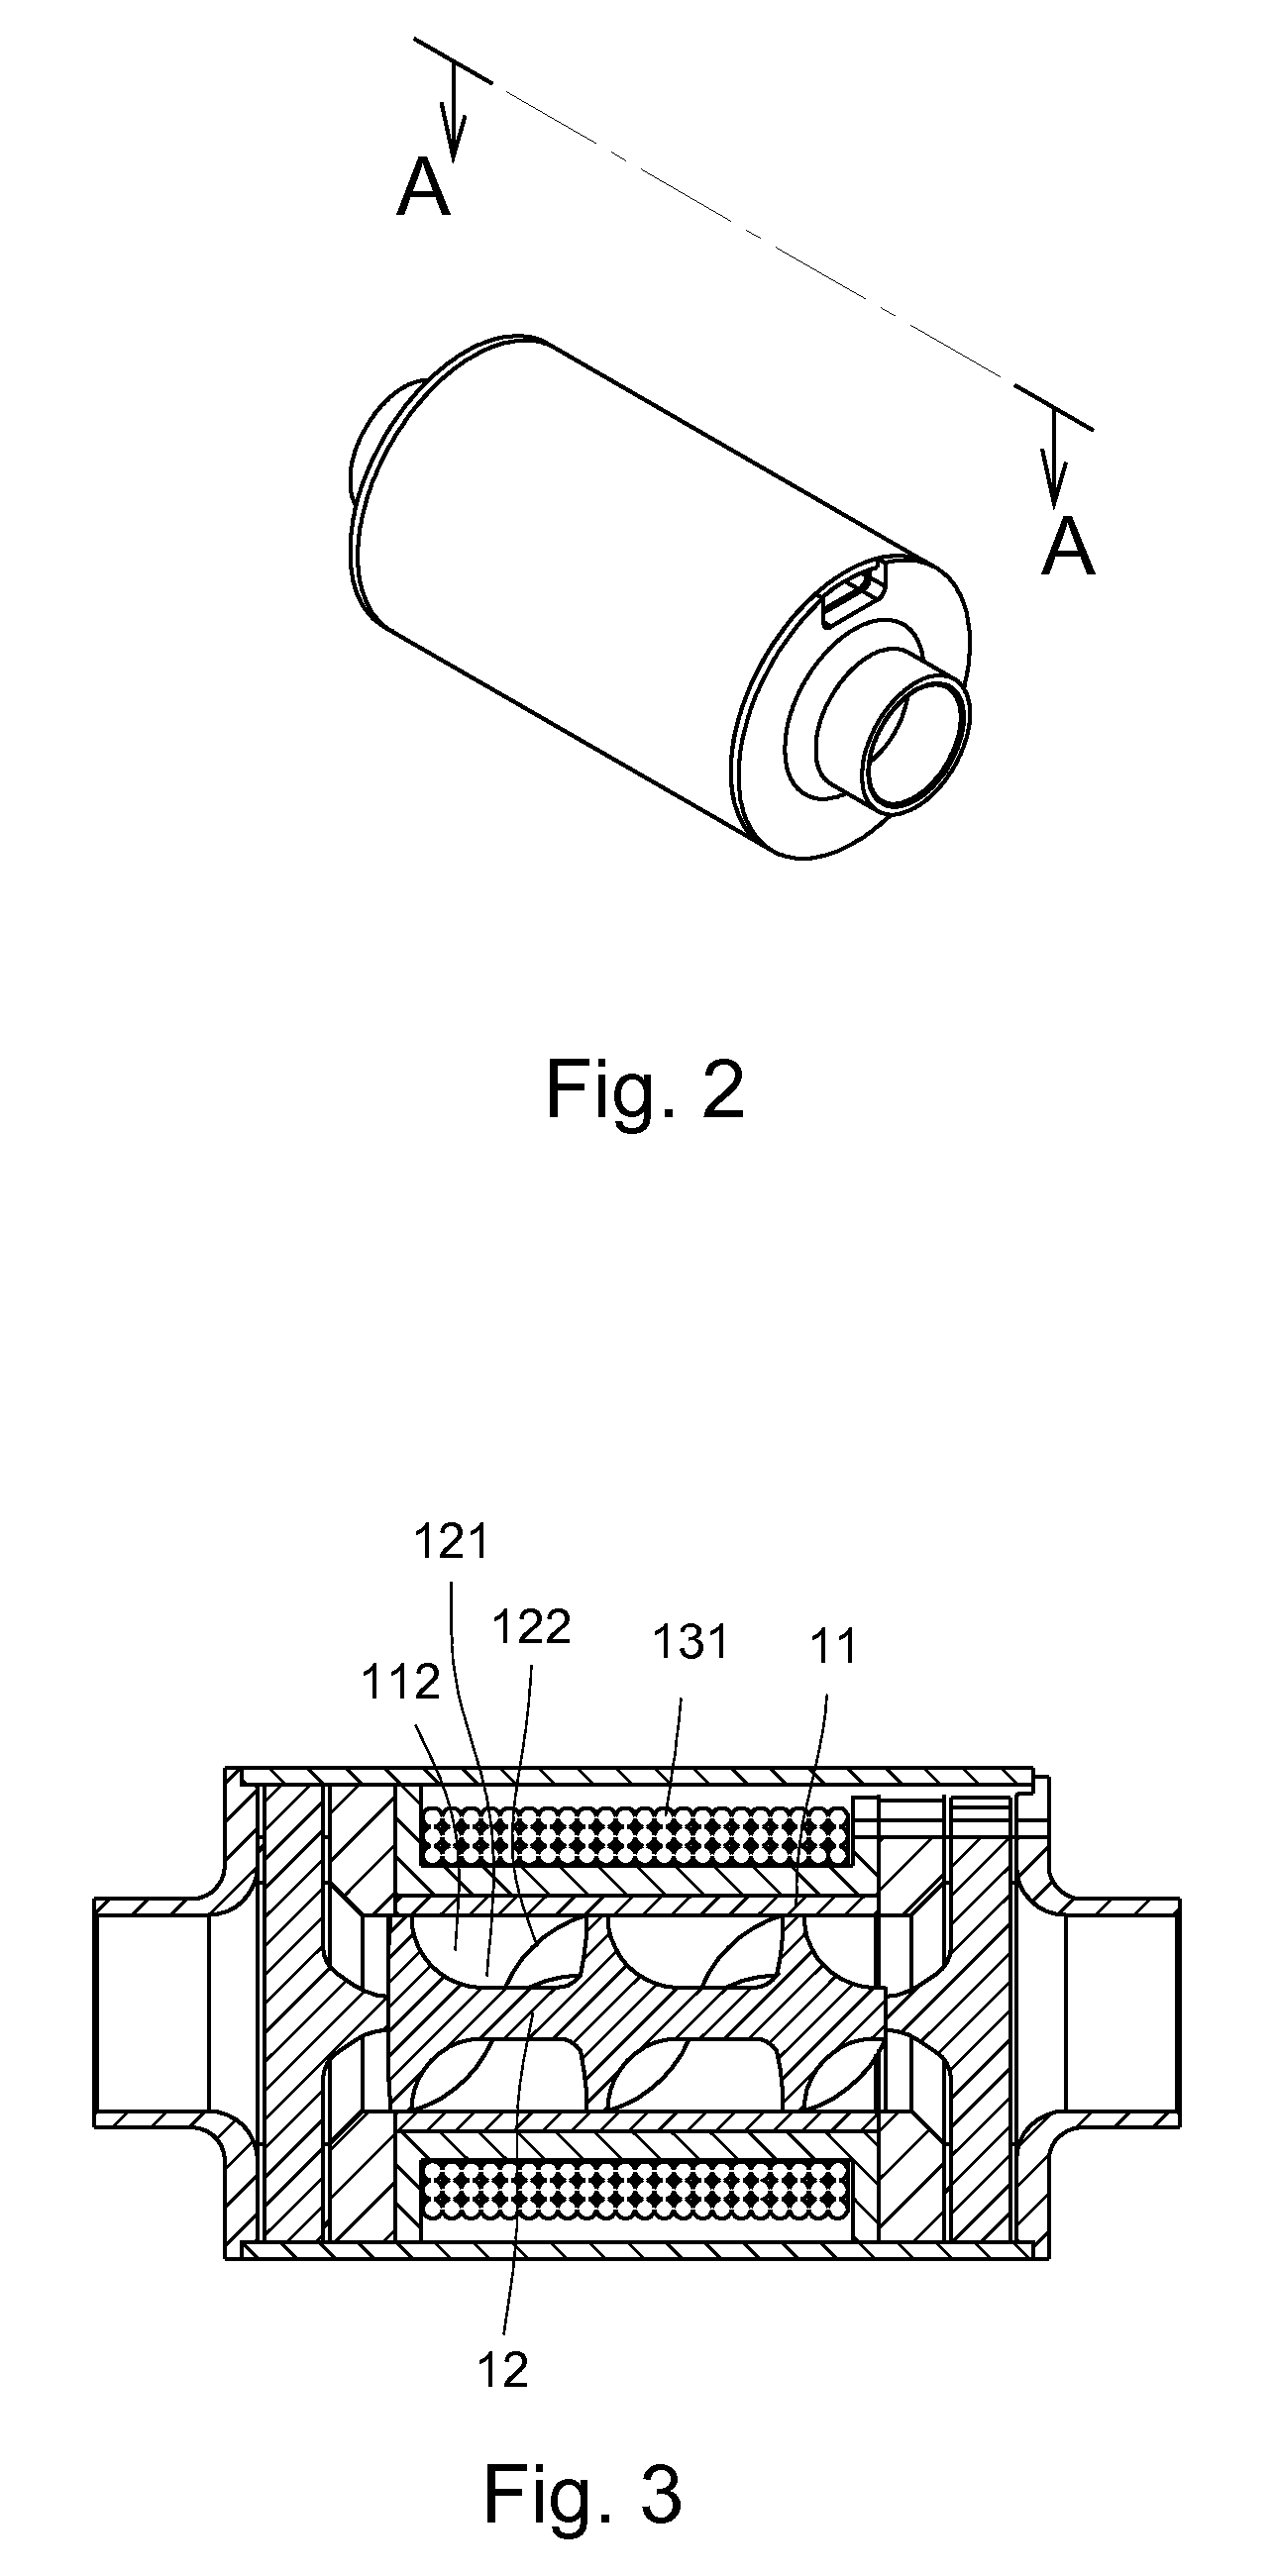 Motor device utilizing magnetic force to drive a rotor